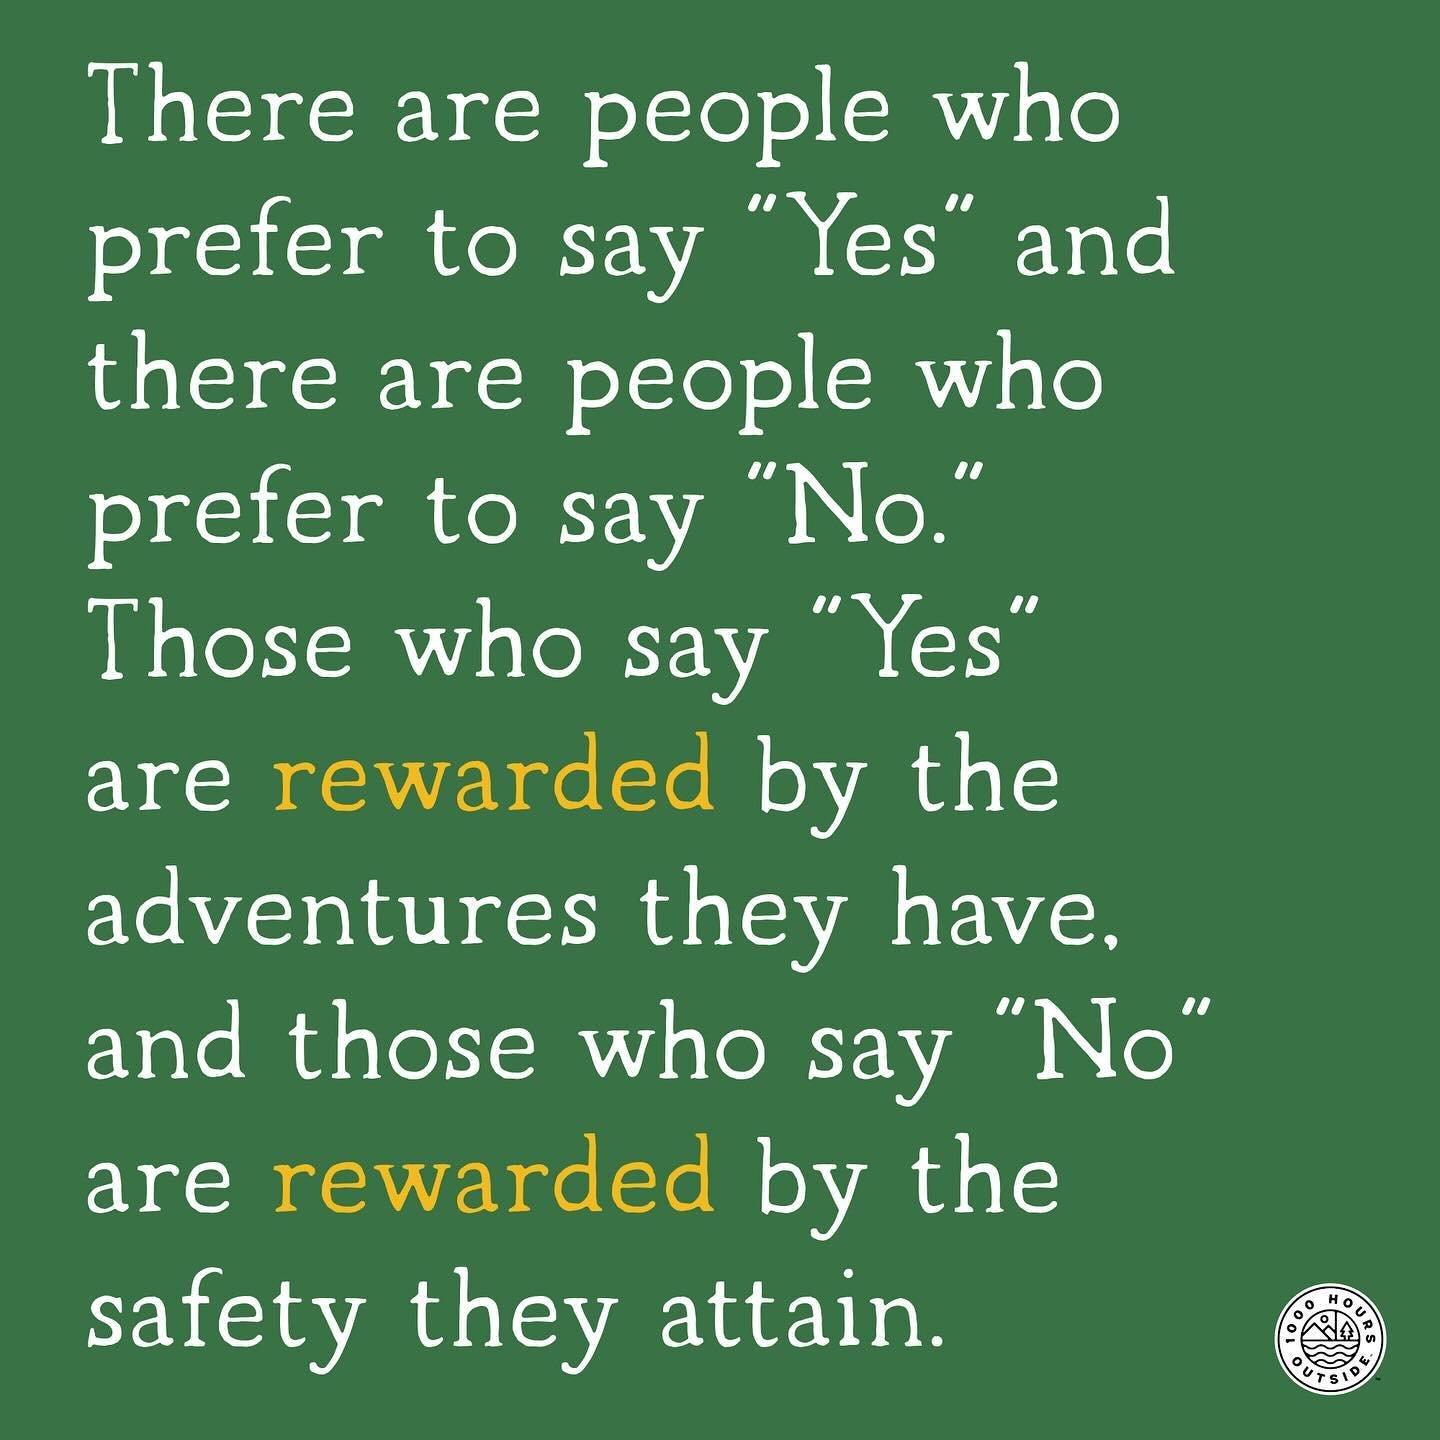 Oh, this is thought-provoking. Do you prefer the adventure reward or the safety reward?

#1000hoursoutside